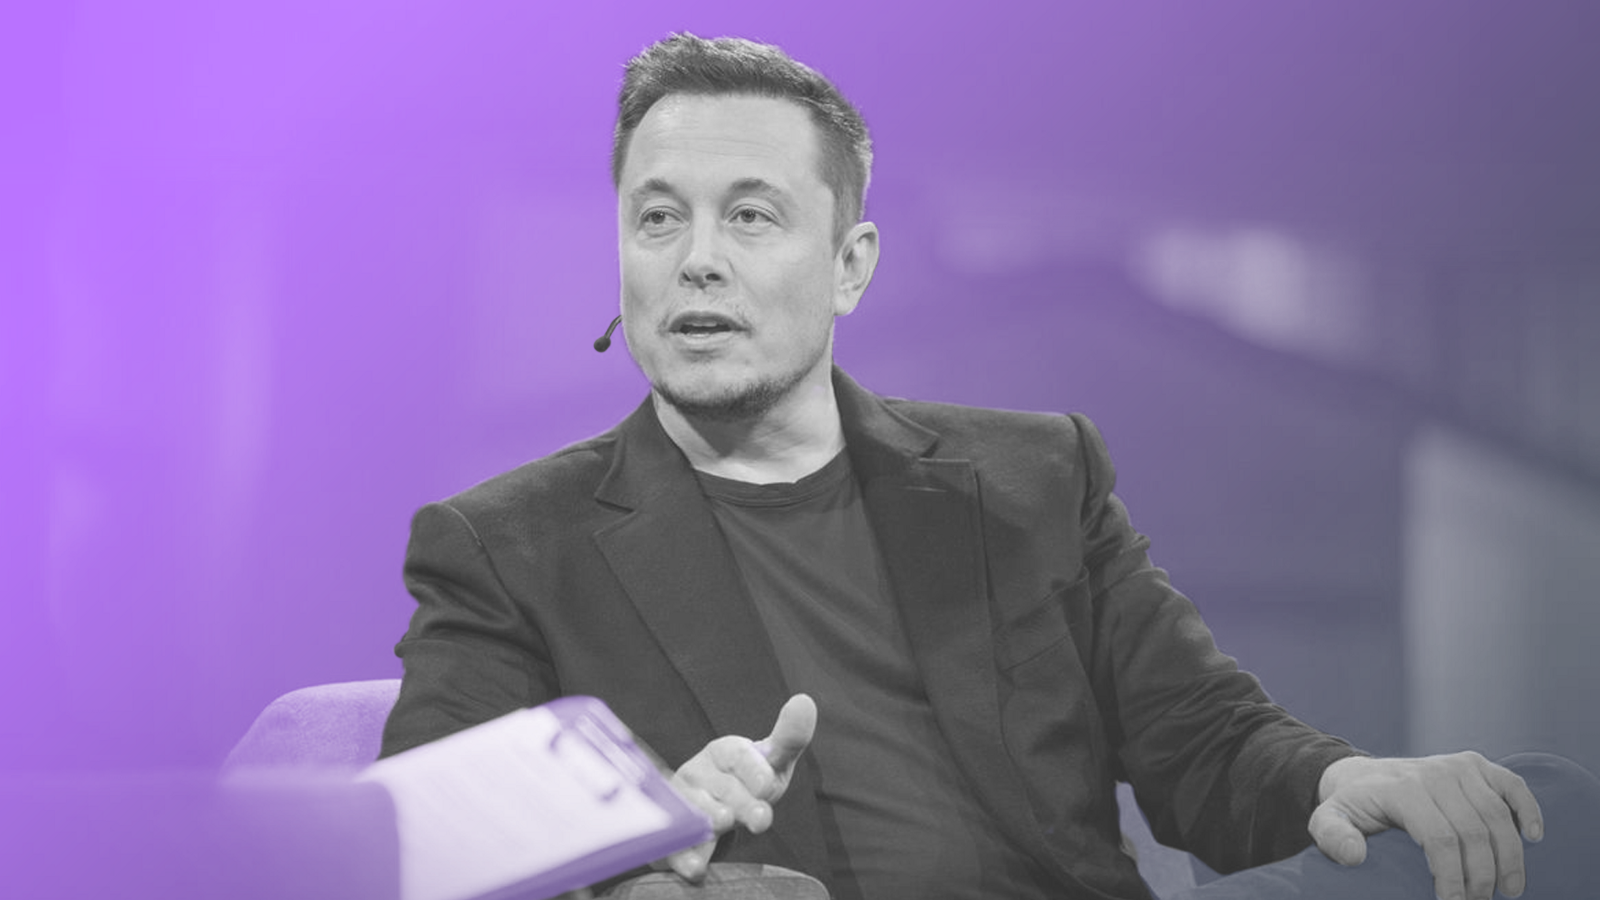 Quick Learning Tactics from Elon Musk, Who Achieved Success in 8 Sectors in 25 Years